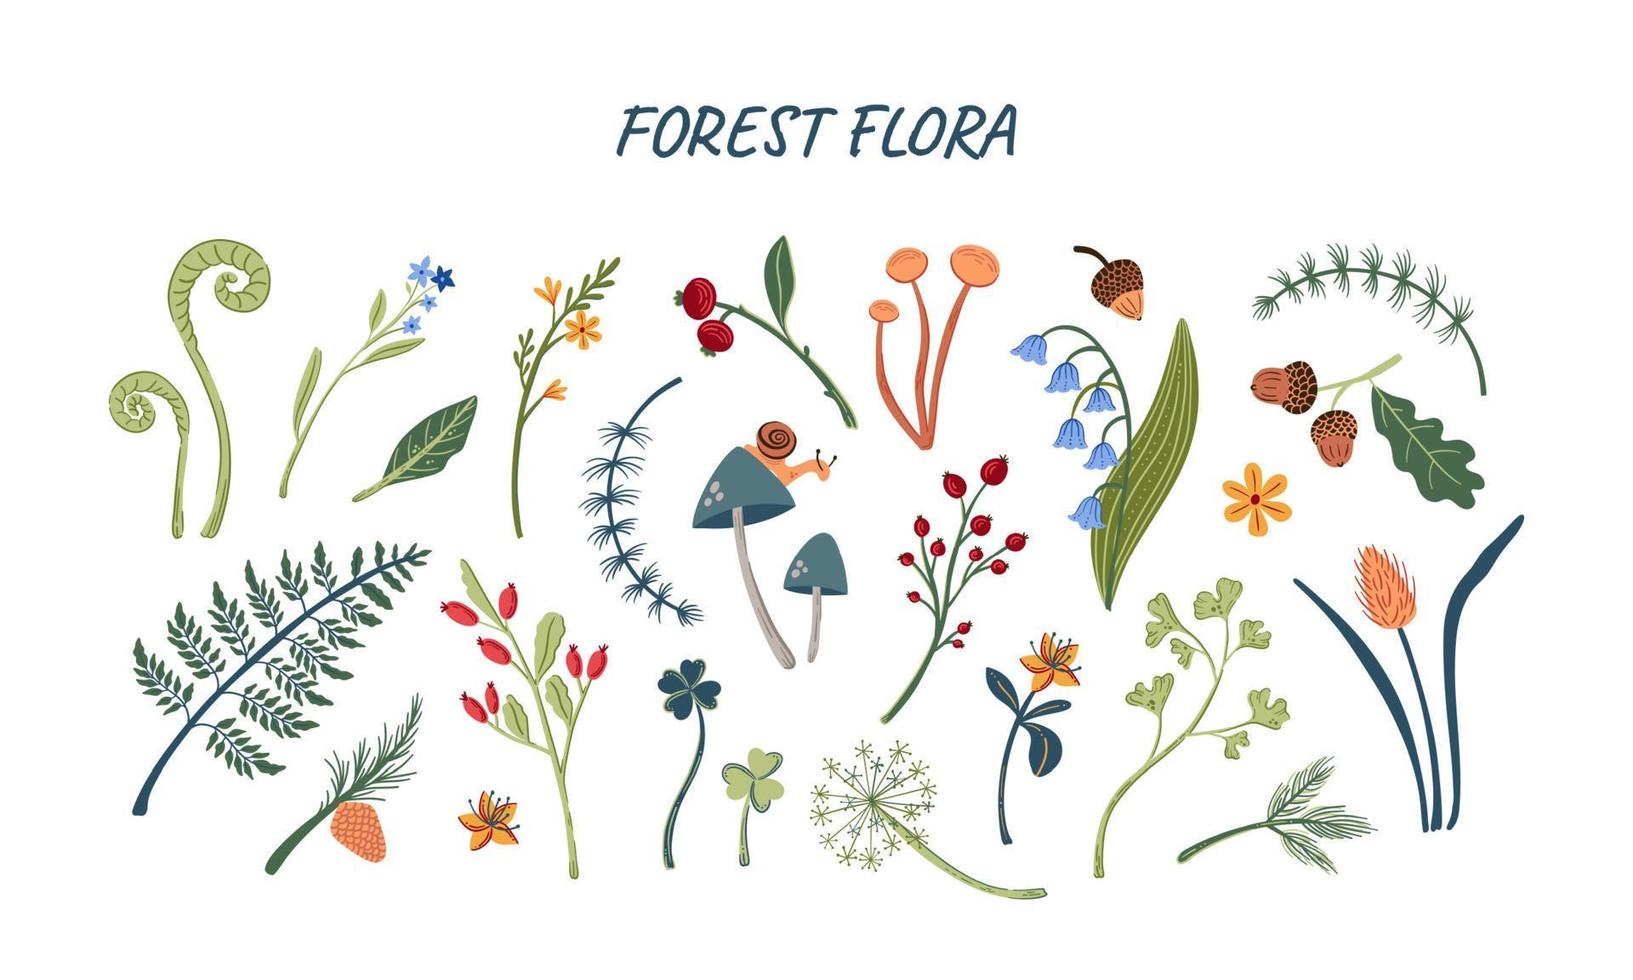 Forest flora big set of hand drawn plants, mushrooms and leaves vector illustration. Woodland botany isolated objects